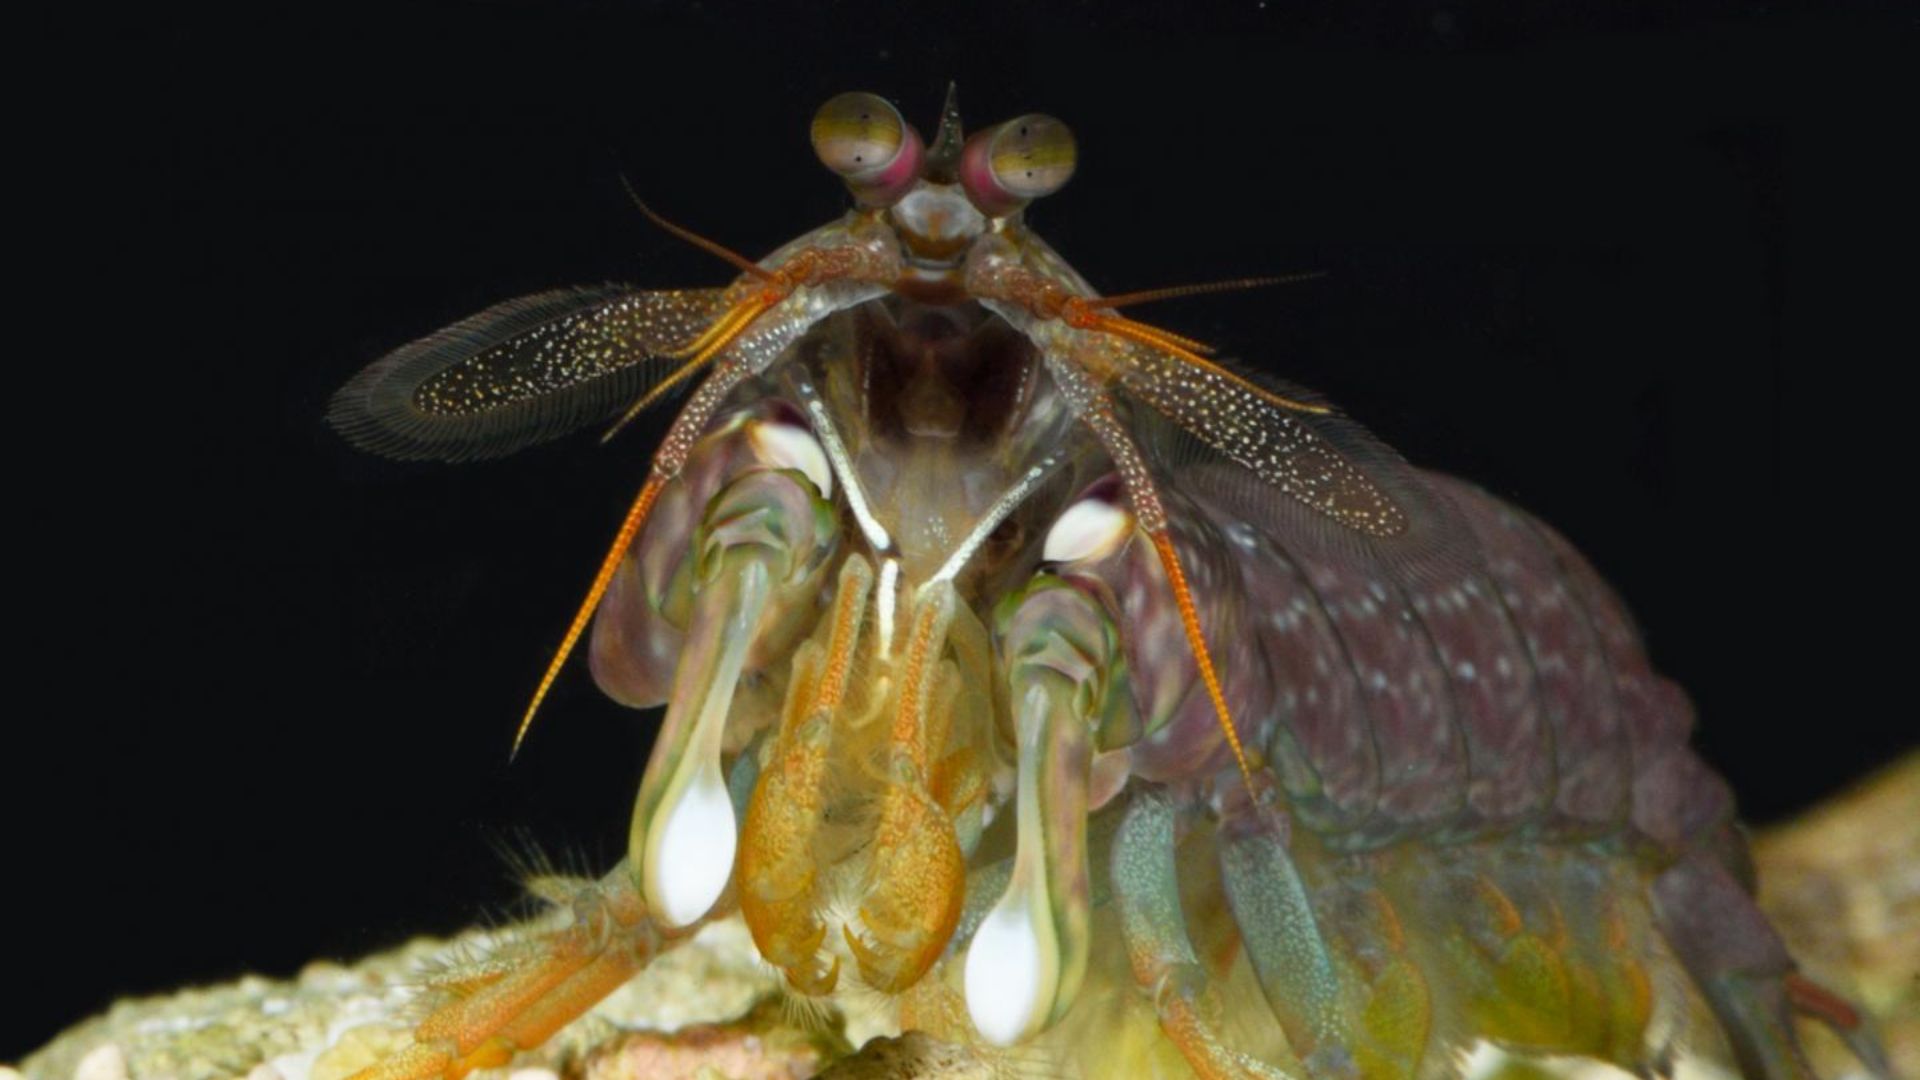 Green’s research highlights the importance of studying both physical structures and animal behavior. This combined approach offers a deeper understanding of how creatures like the mantis shrimp navigate the challenges of their environment. The study was published in Journal of Experimental Biology.